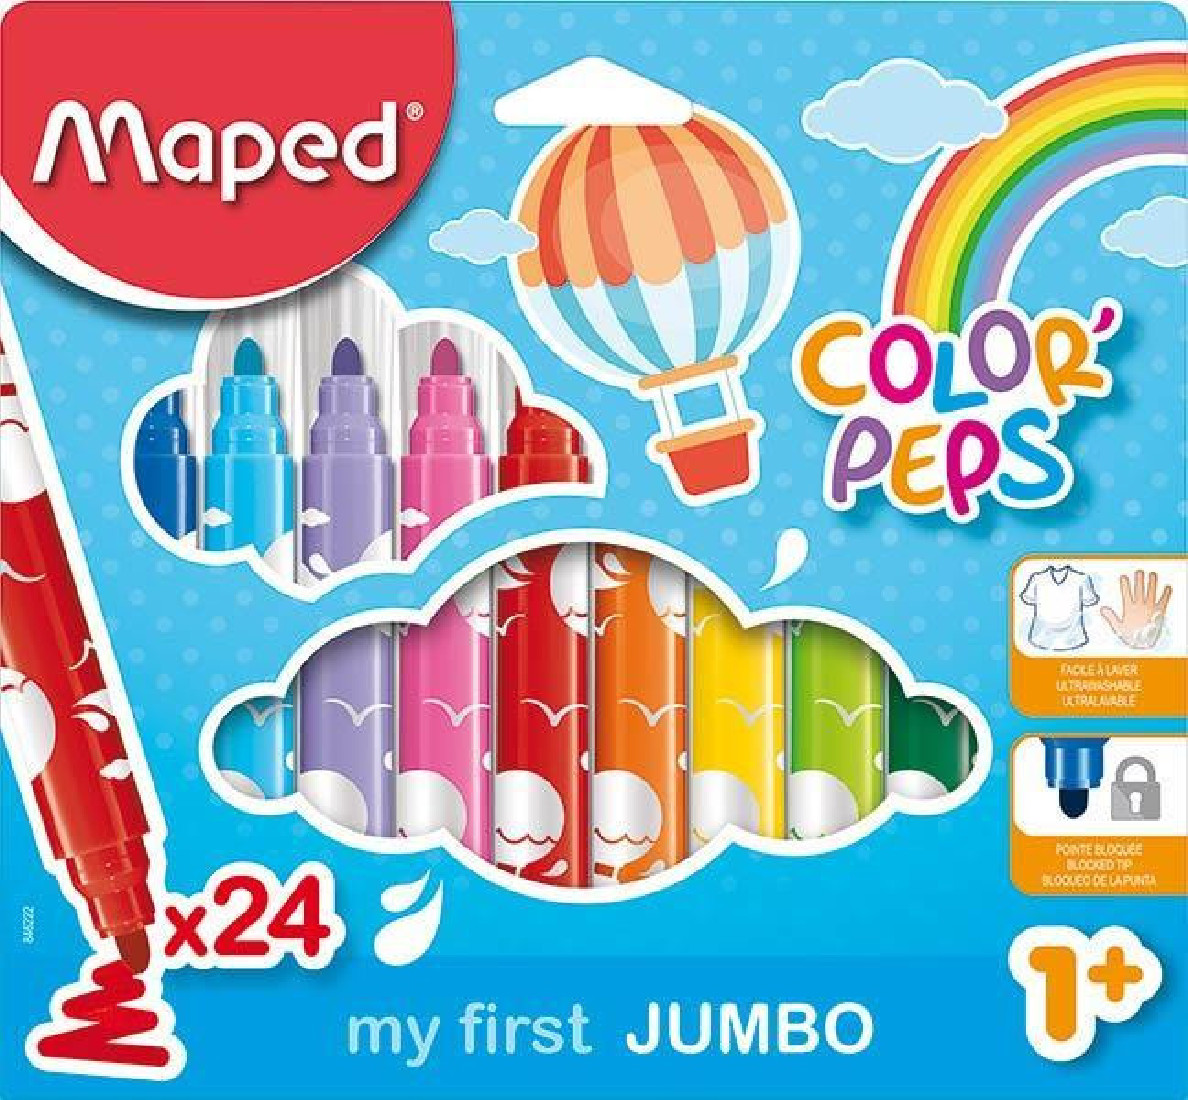 Maped μαρκαδόροι 24τμχ. Color Peps my first Jumbo 846222